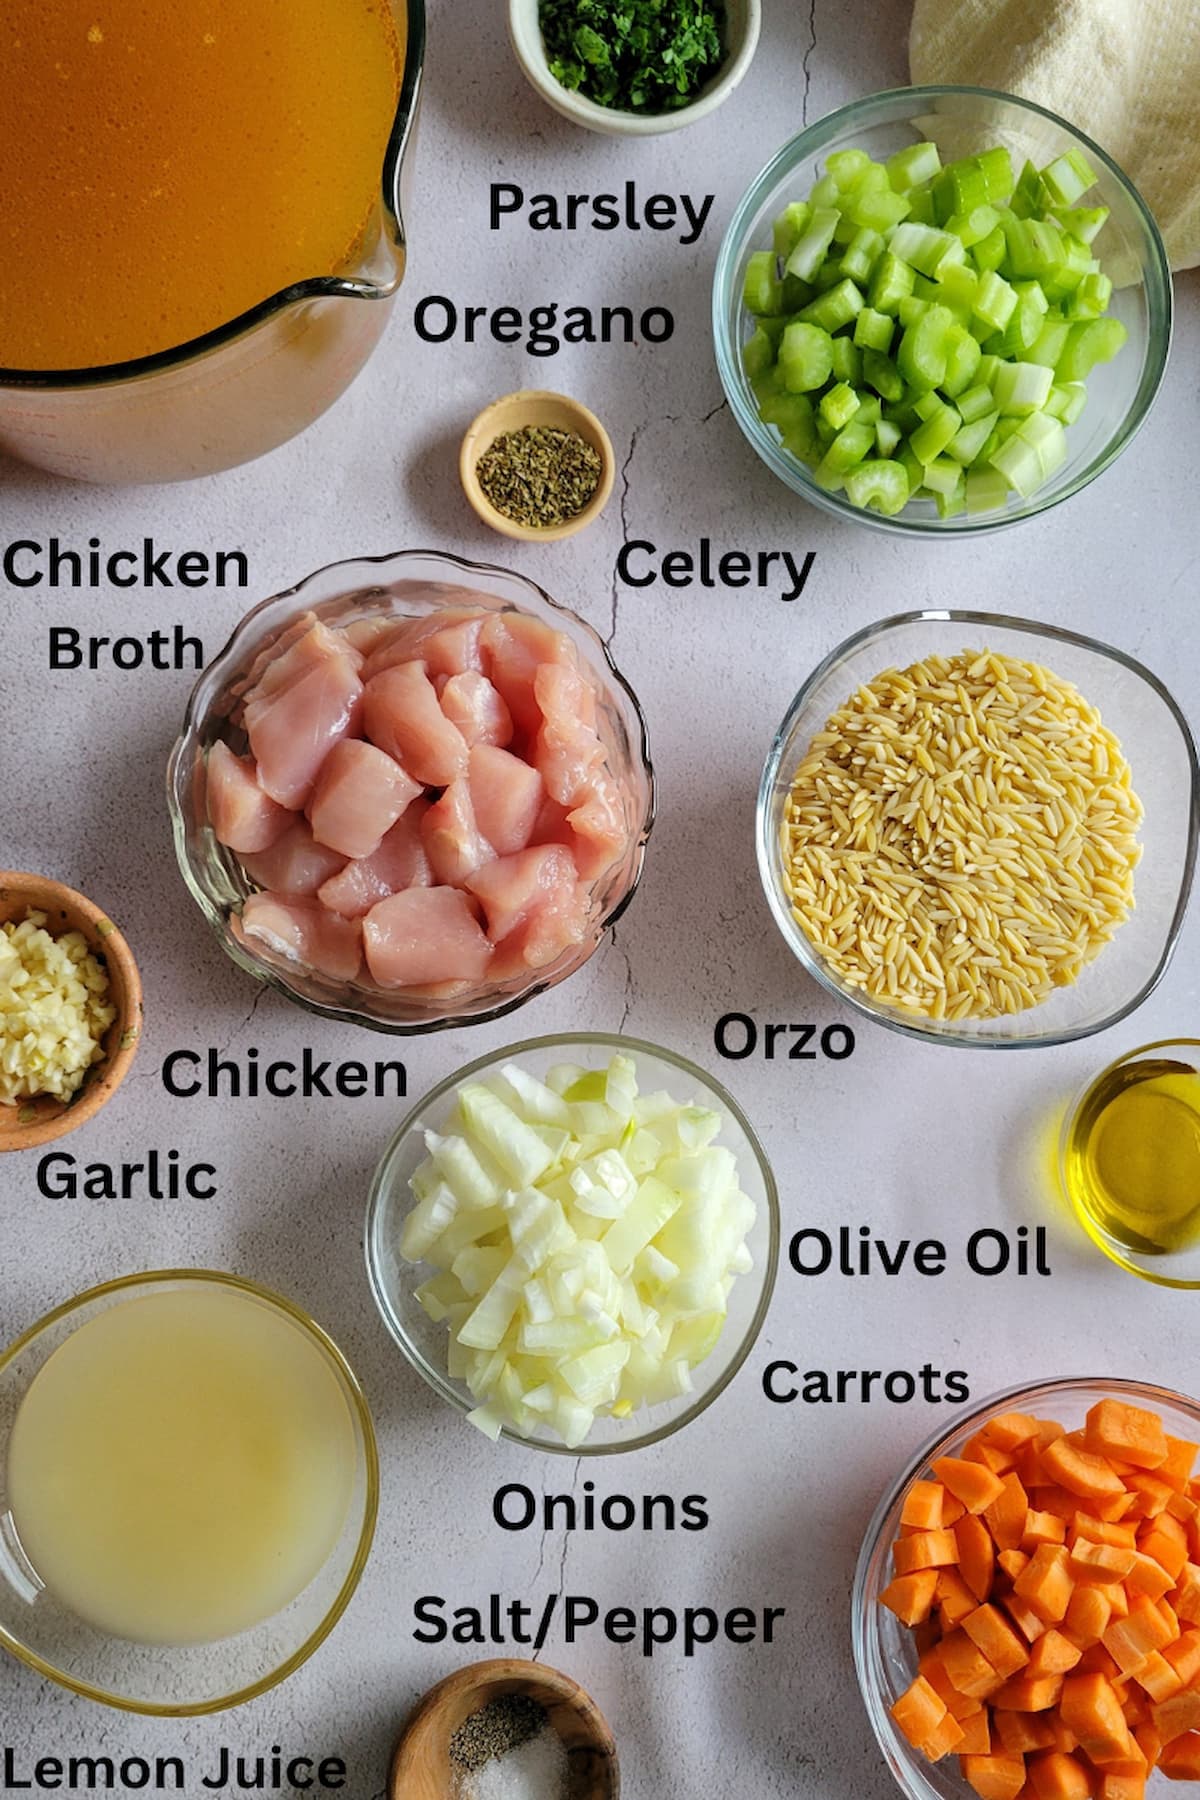 ingredients for greek chicken soup with lemon and orzo - chicken, lemon juice, orzo, onions, celery, garlic, carrots, parsley, salt/pepper, olive oil, chicken broth, oregano